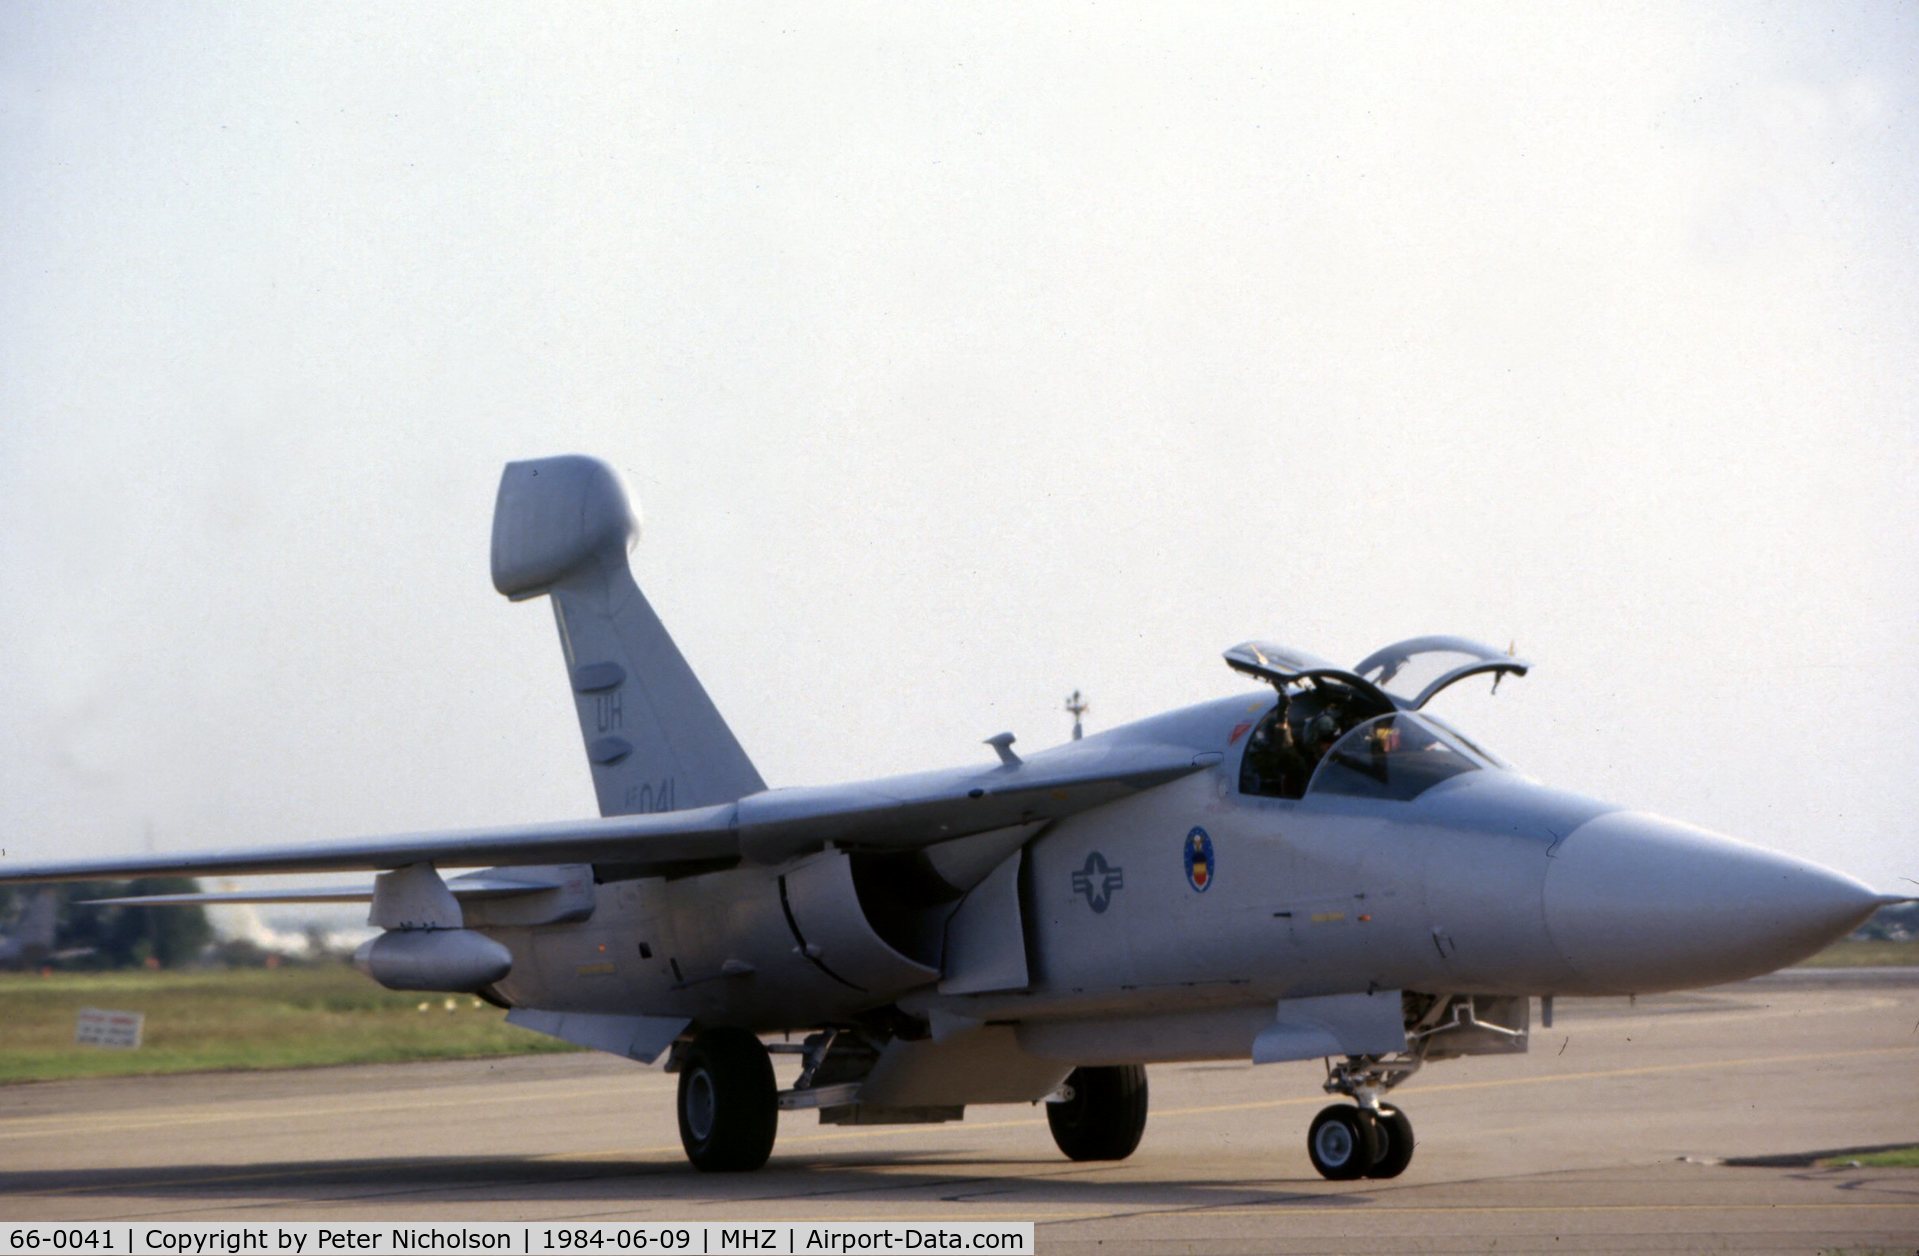 66-0041, General Dynamics EF-111A Raven C/N EF-02, Another view of the 42 ECS Raven, taxying in after display at the 1984 RAF Mildenhall Air Fete.